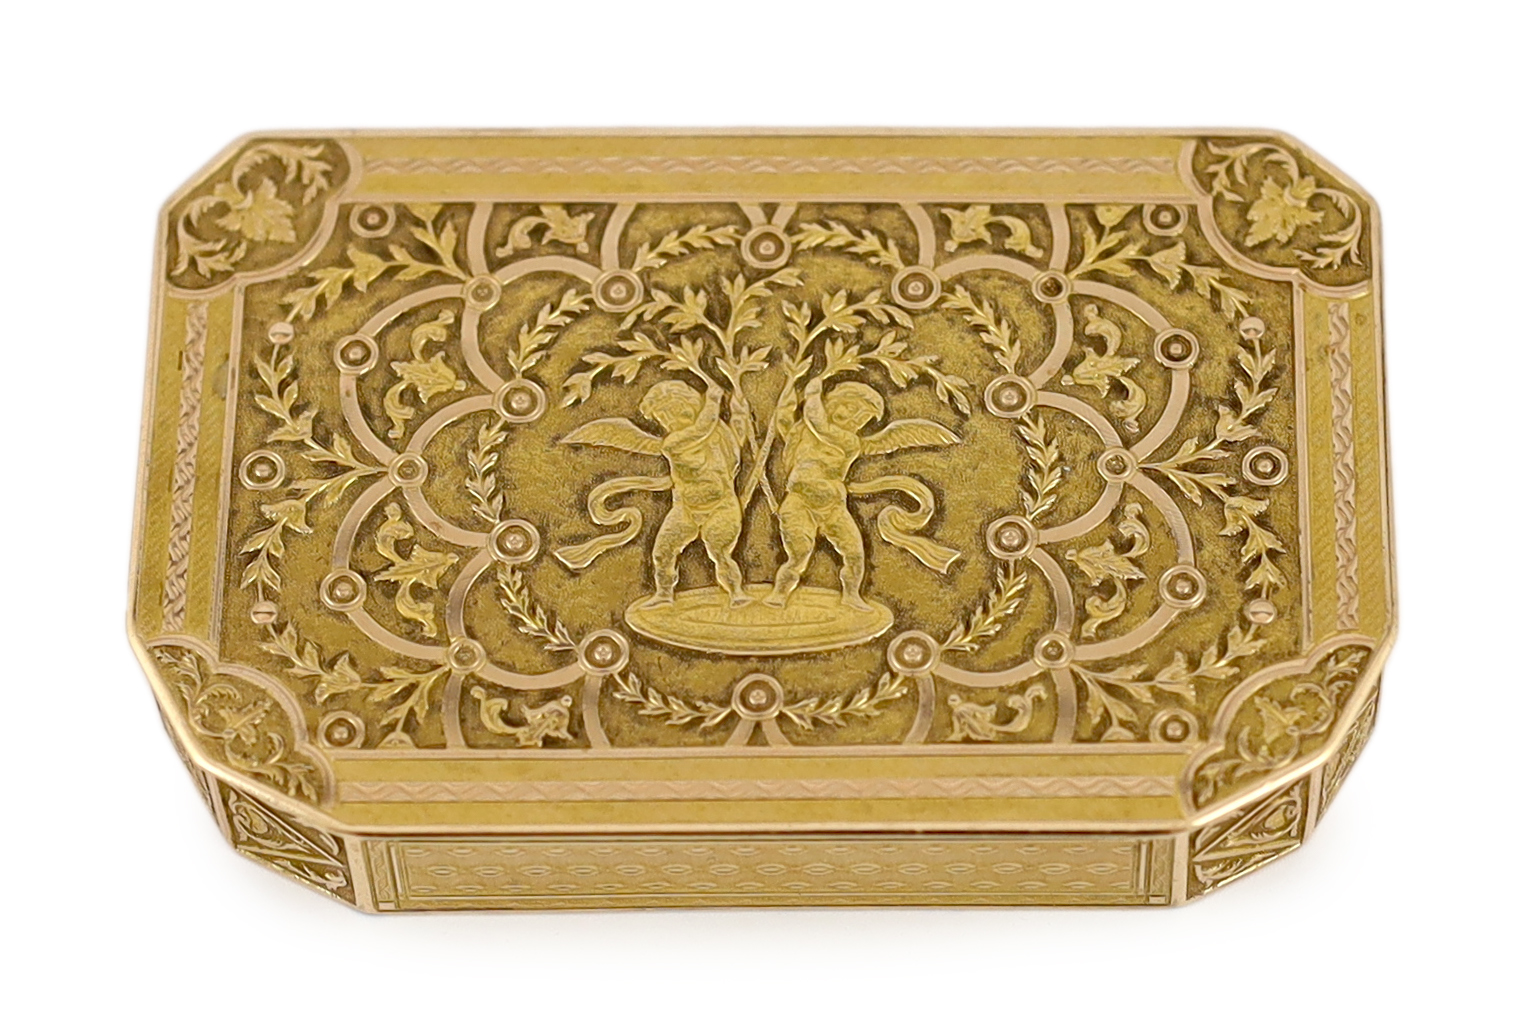 A 19th century Swiss engraved gold table snuff box